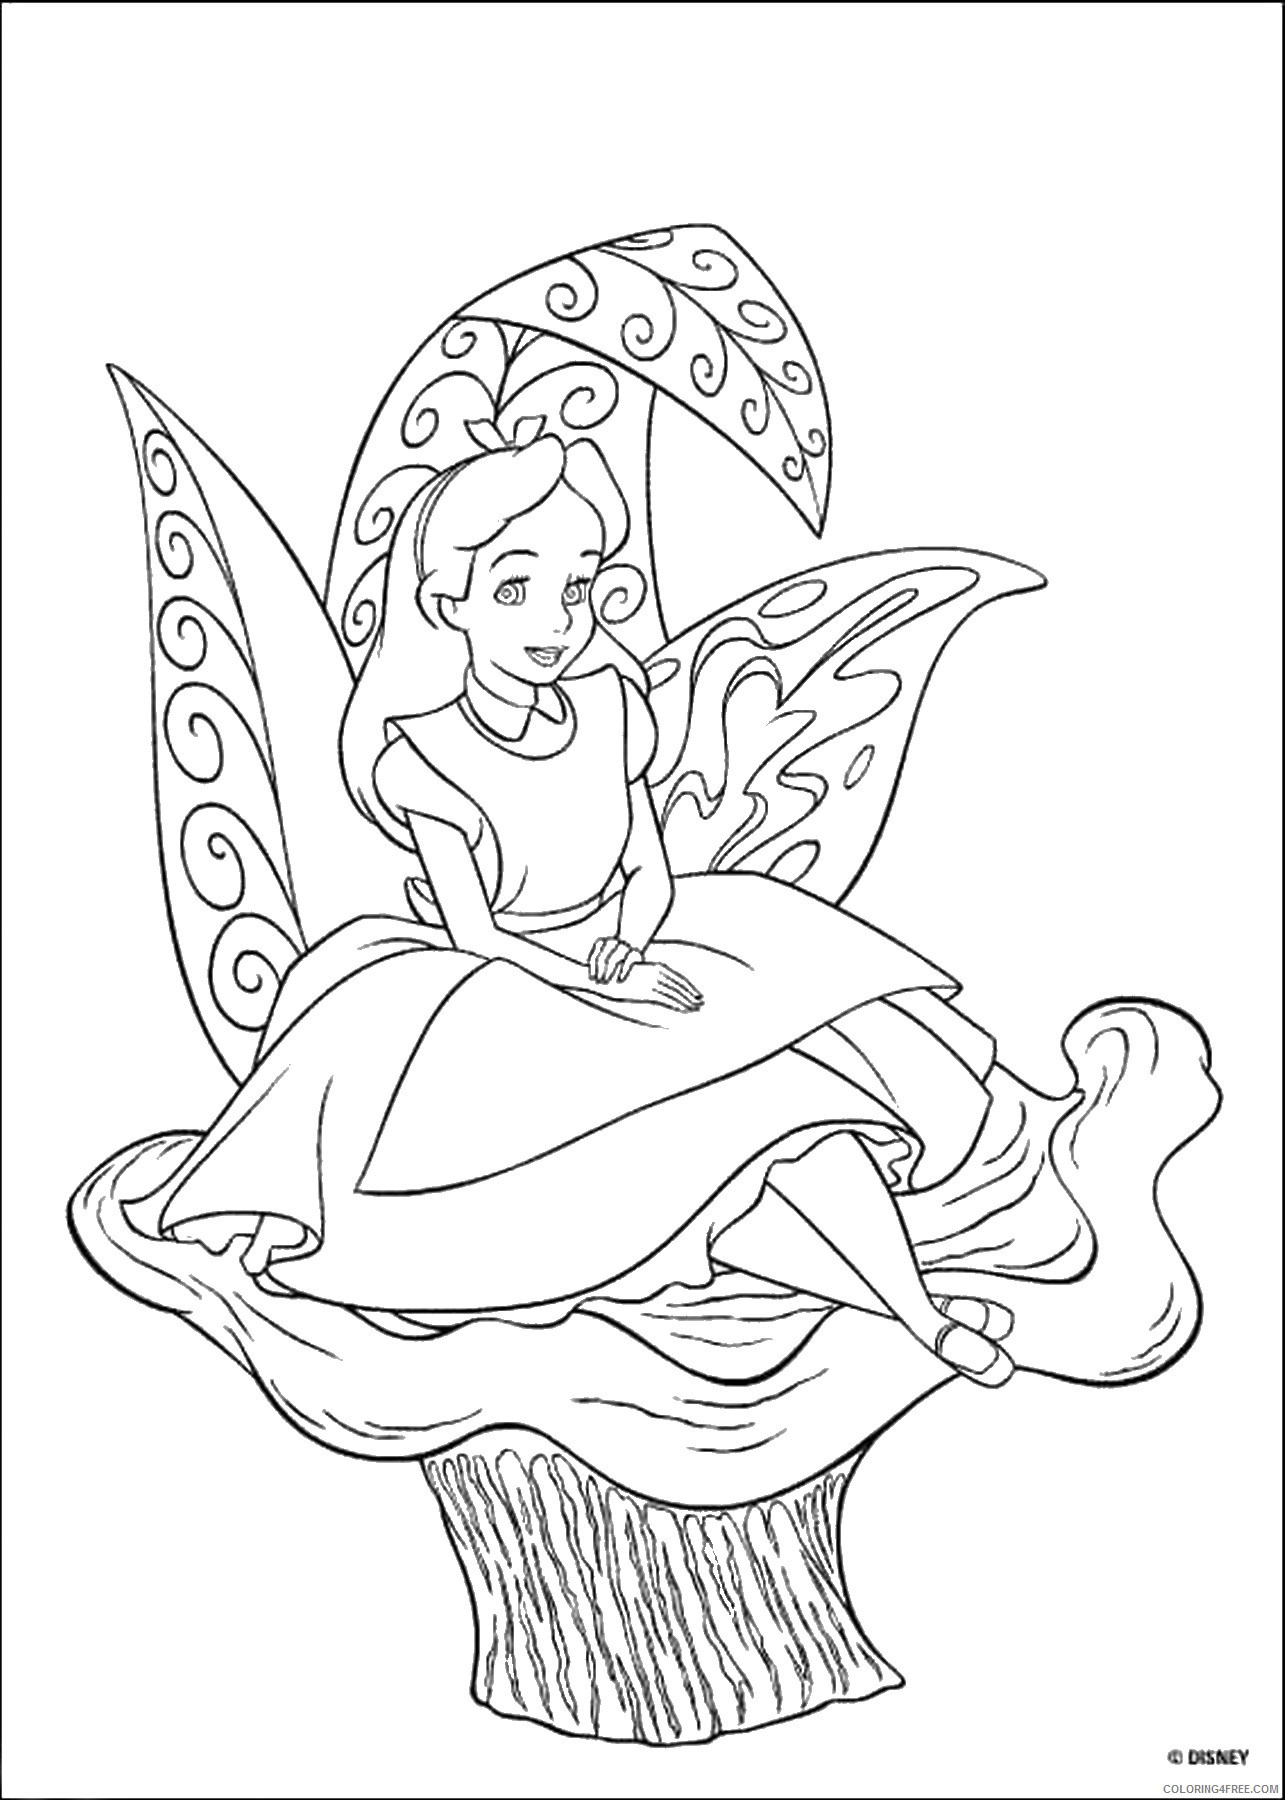 Alice in Wonderland Coloring Pages Cartoons alice_06 Printable 2020 0348 Coloring4free